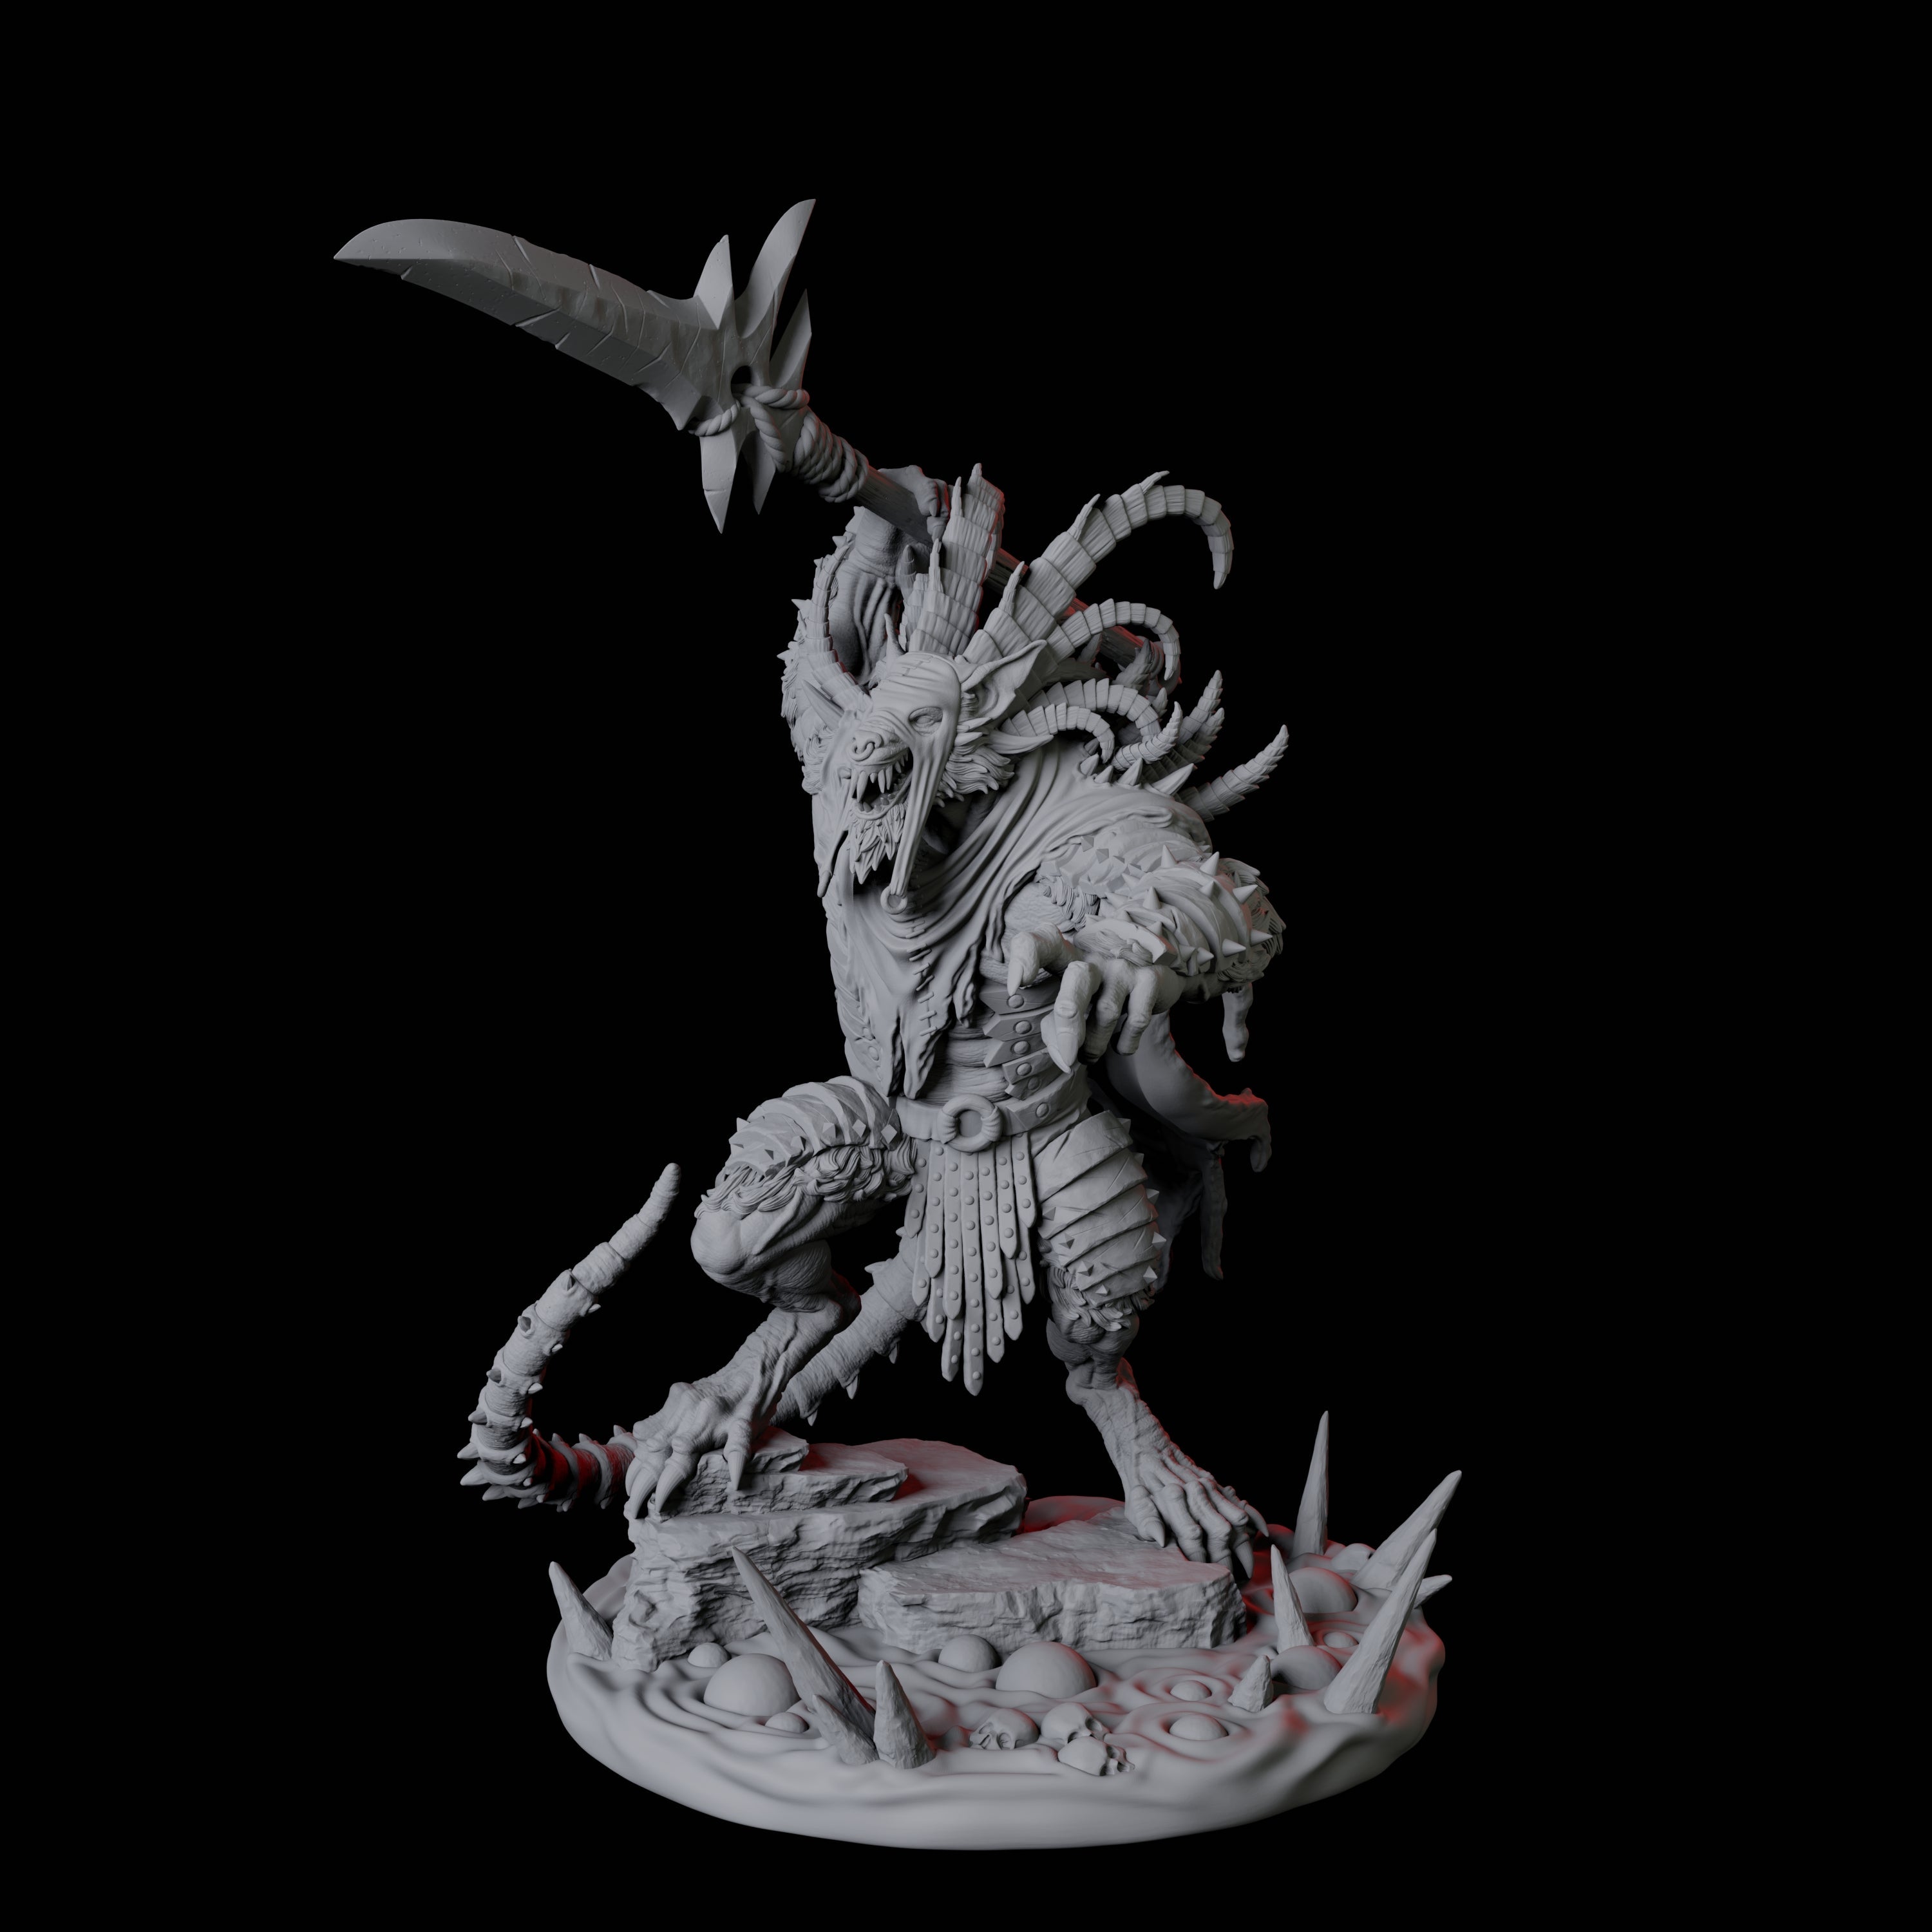 Four Ratfolk Filth Paladins Miniature for Dungeons and Dragons, Pathfinder or other TTRPGs